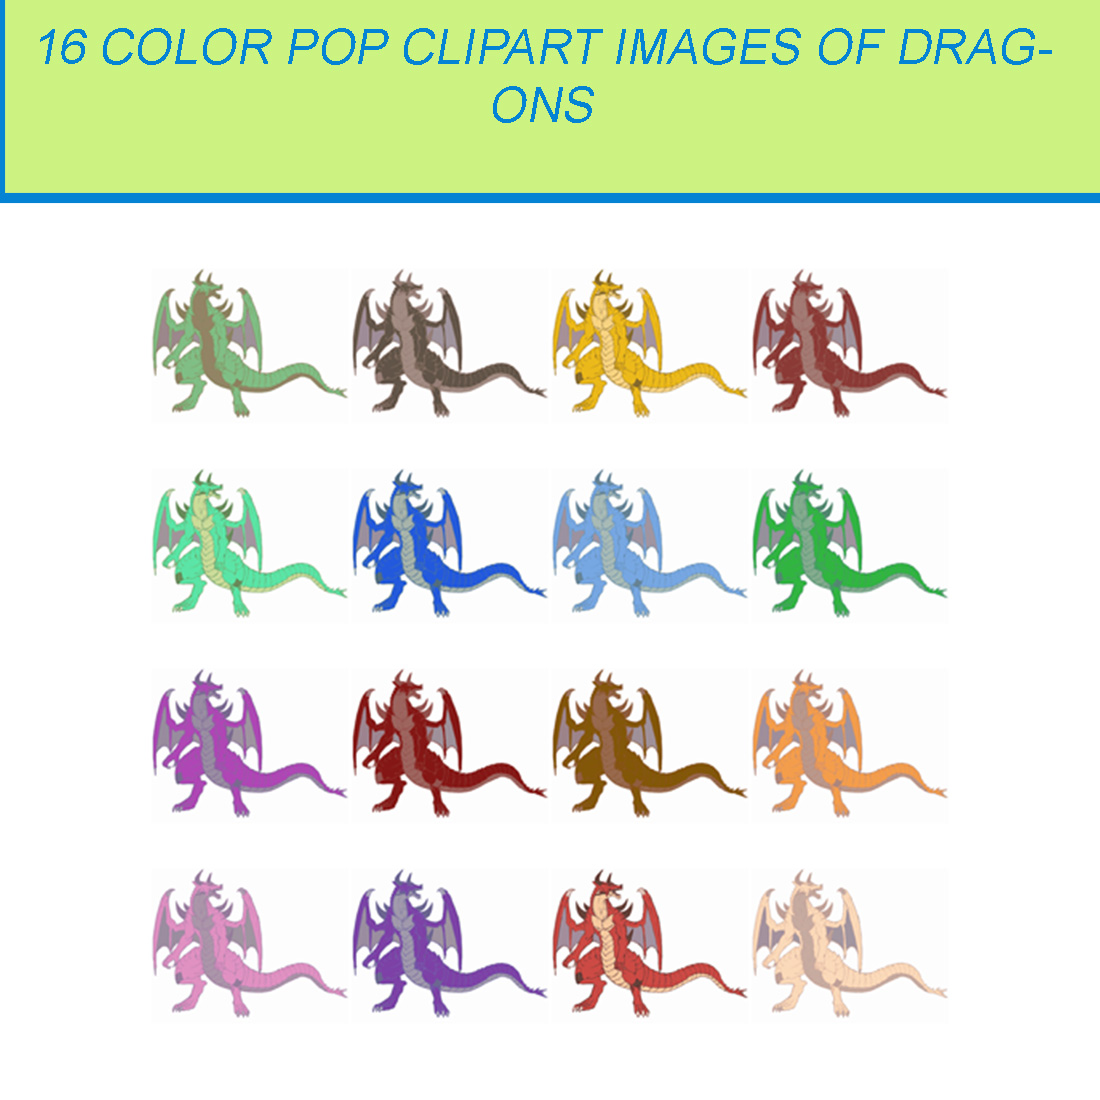 16 COLOR POP CLIPART IMAGES OF DRAGON cover image.